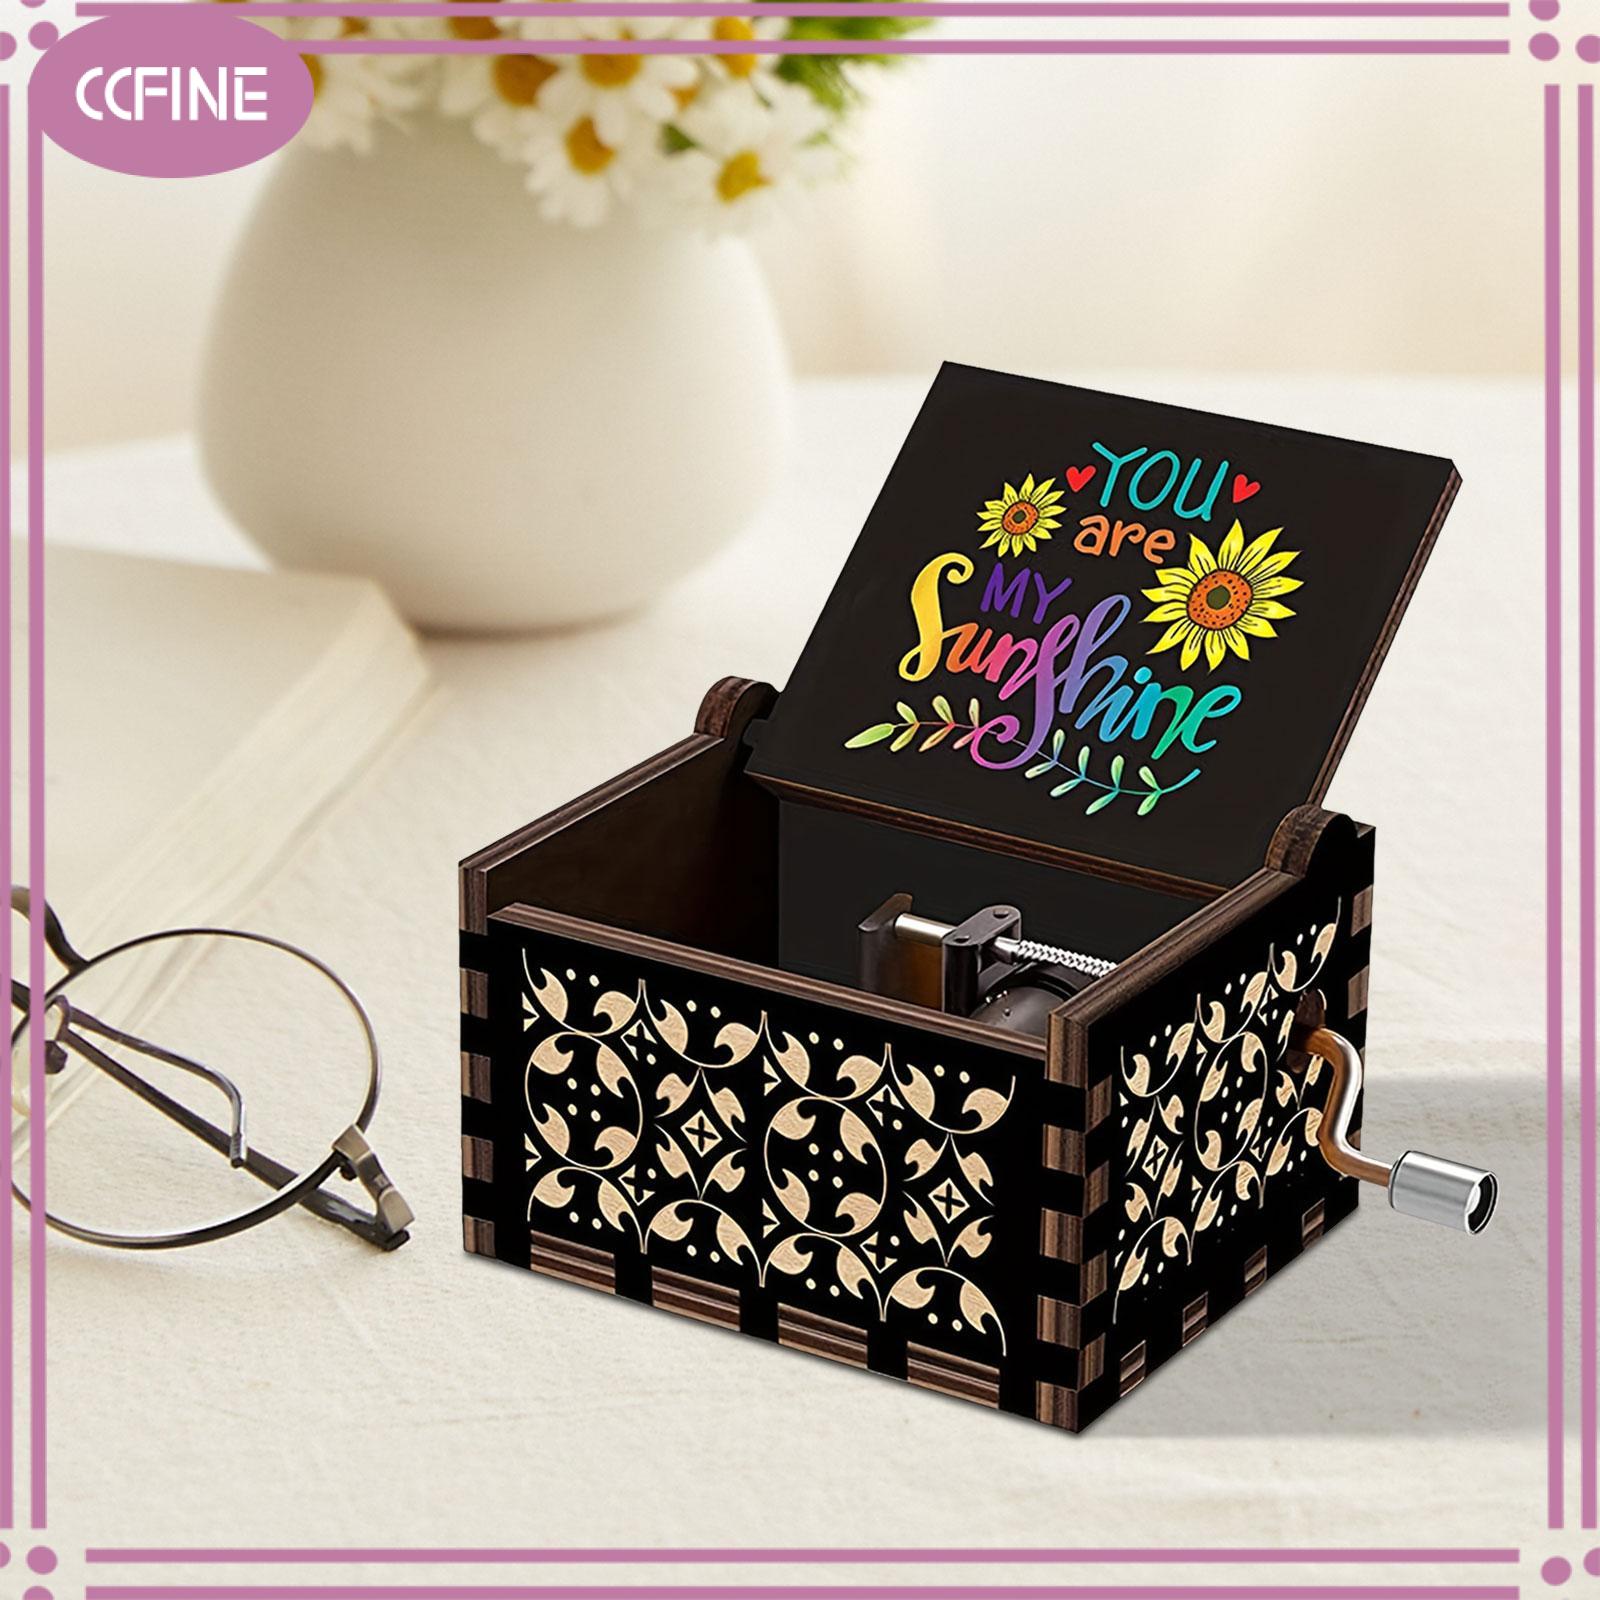 CCFine You Are My Sunshainemusic Boxes Love Gift Wooden Sunshine Musical